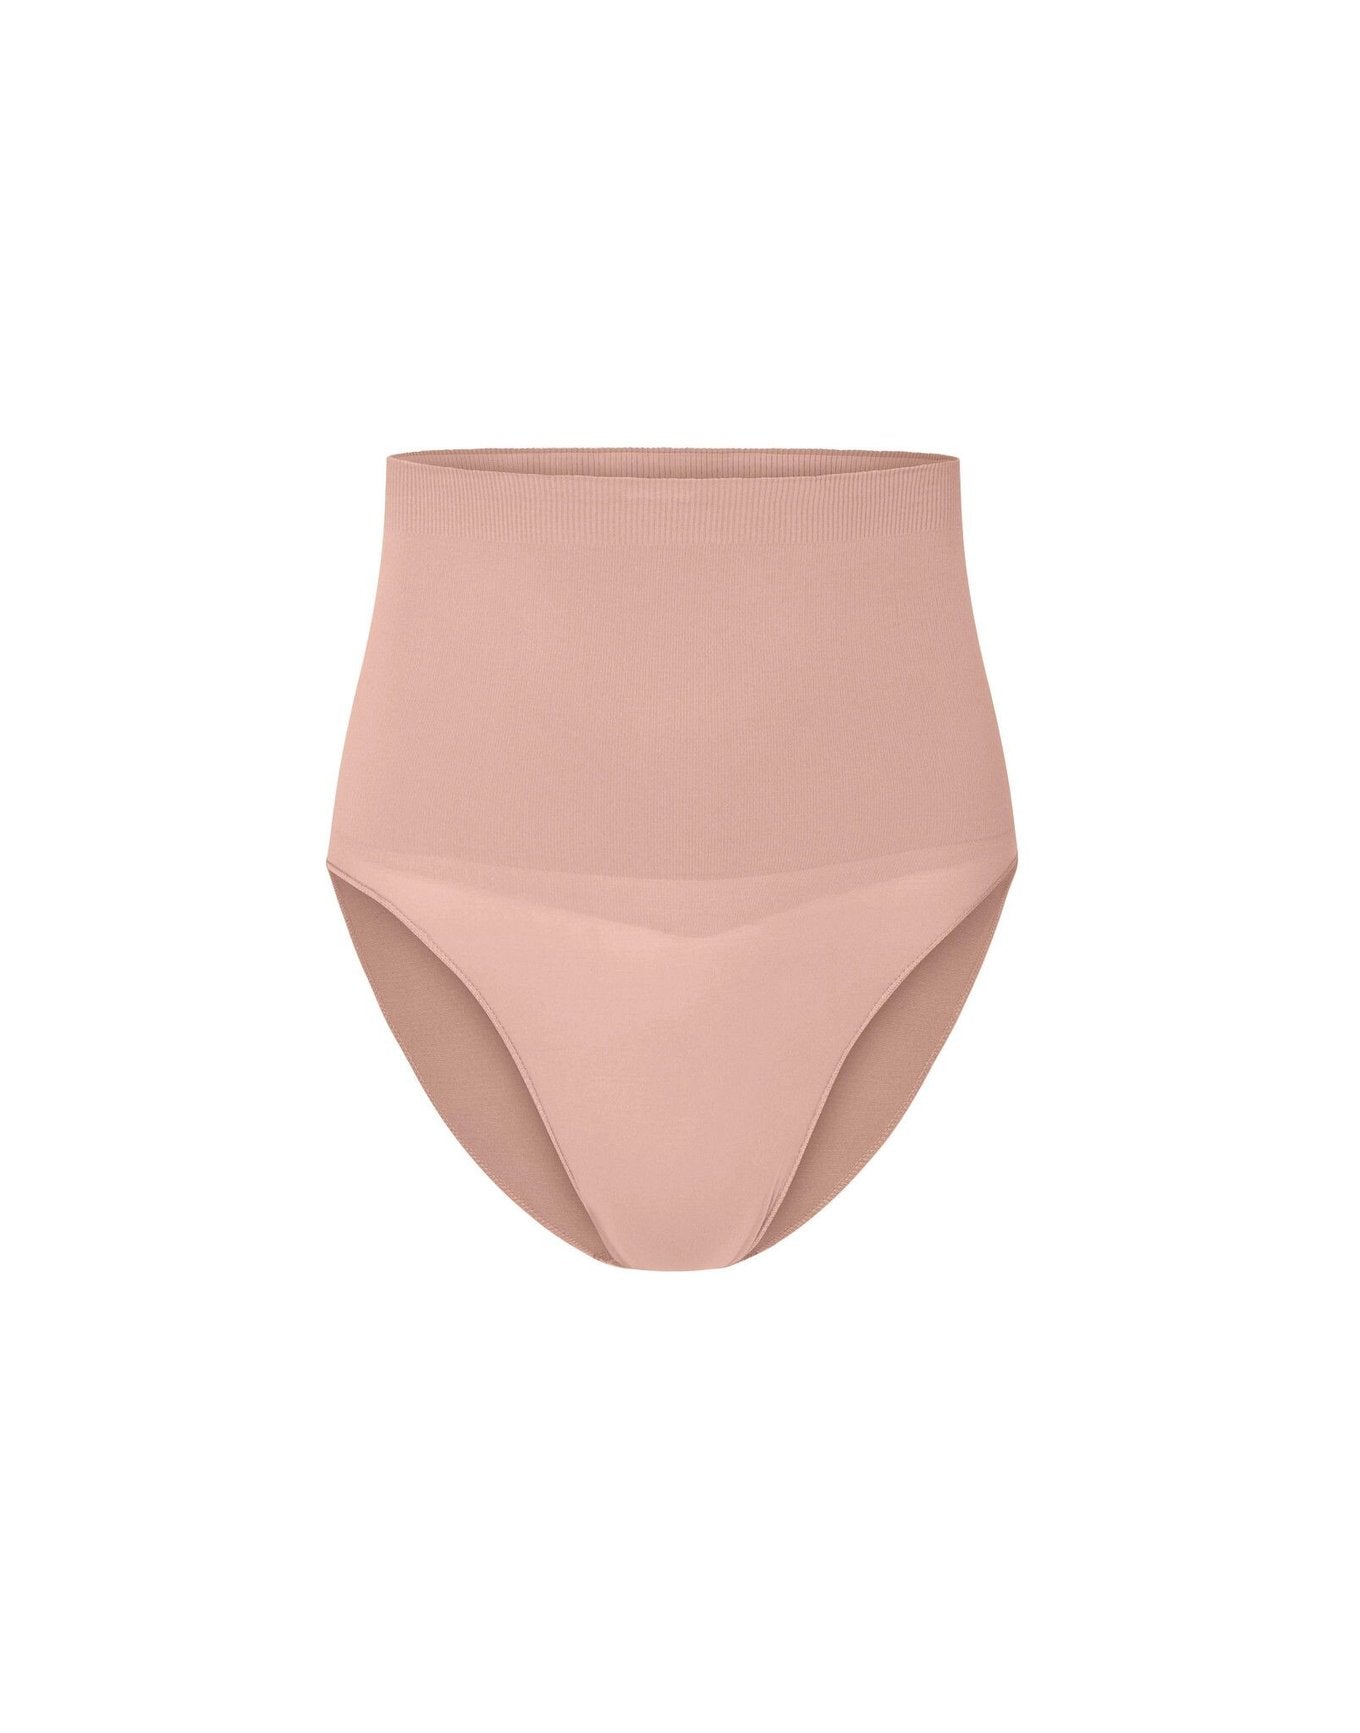 nueskin Hayley High-Compression High-Waist Bikini Brief in color Rose Cloud and shape high waisted